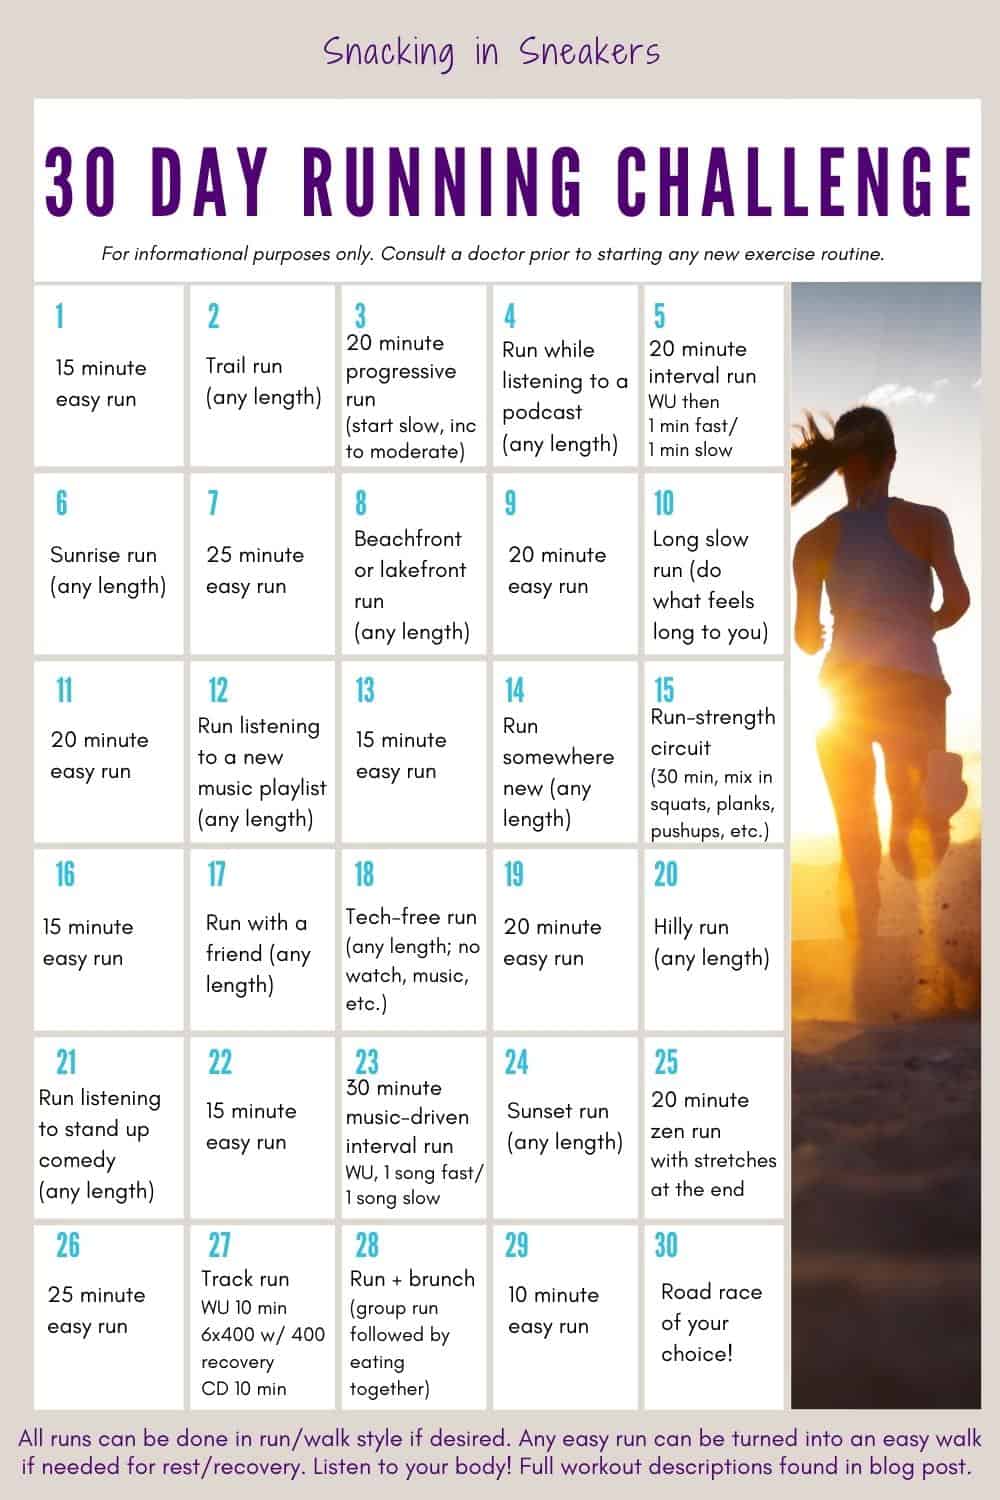 Learn How to Properly Run in 30 Days